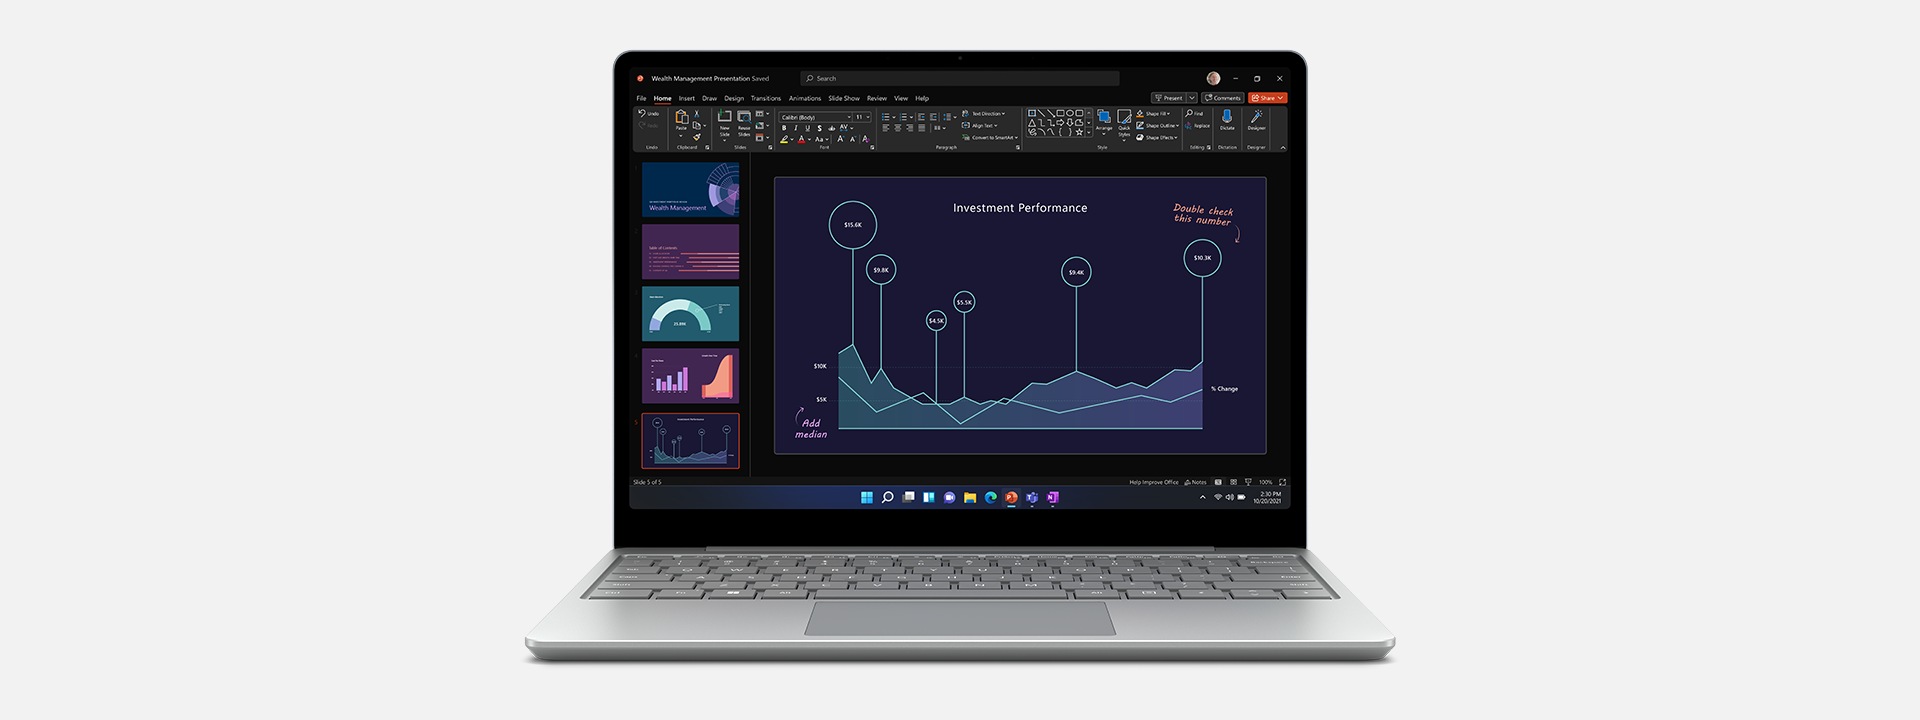 A Microsoft PowerPoint presentation open on Surface Laptop Go 2 for Business.